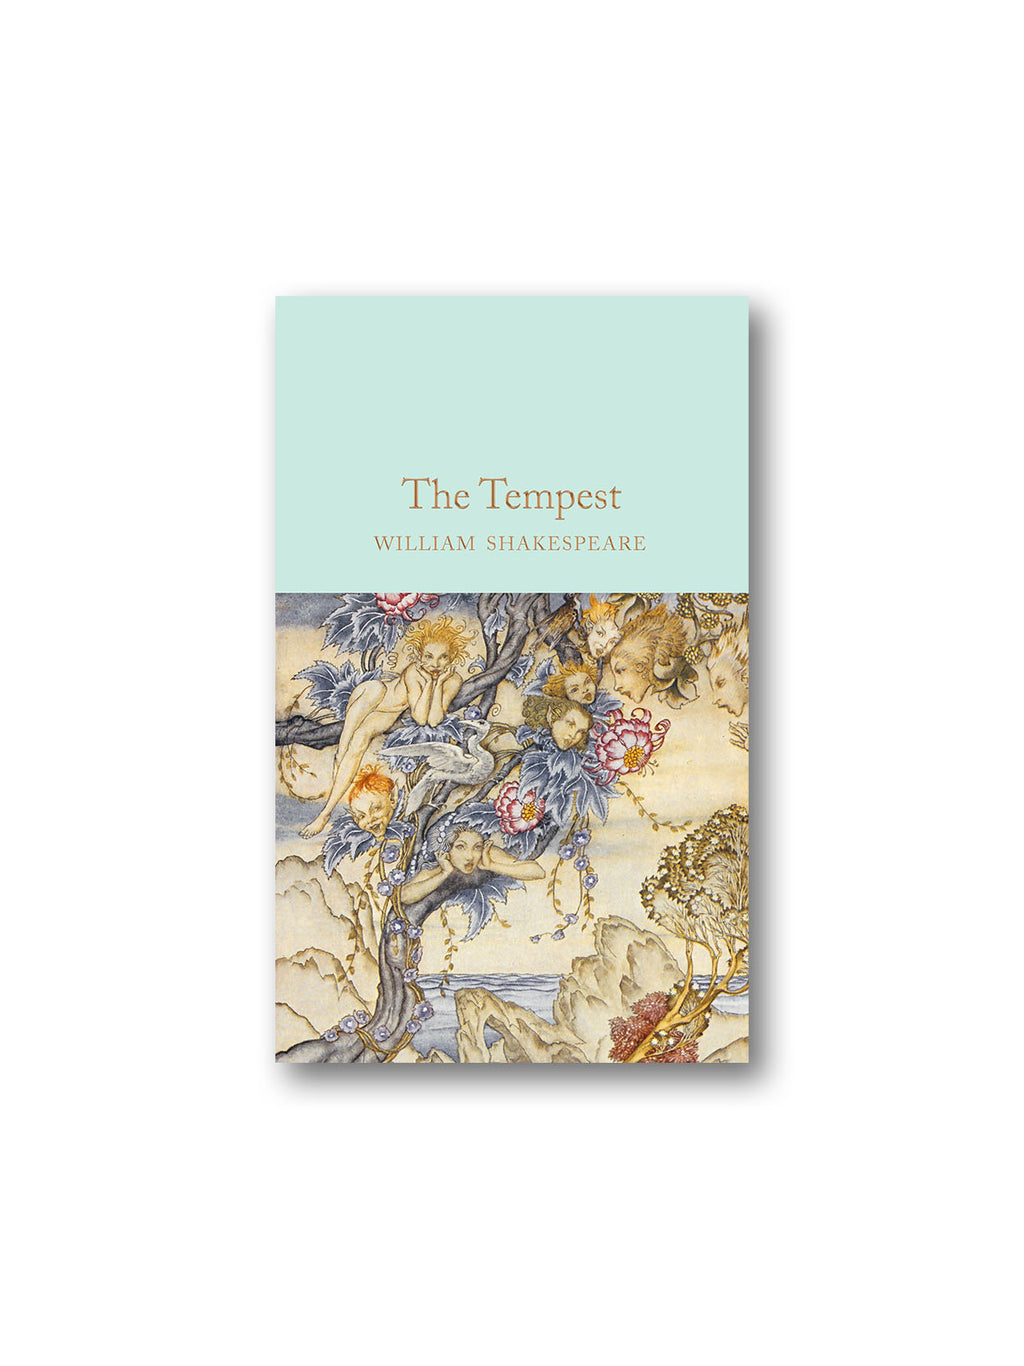 The Tempest - Macmillan Collector's Library